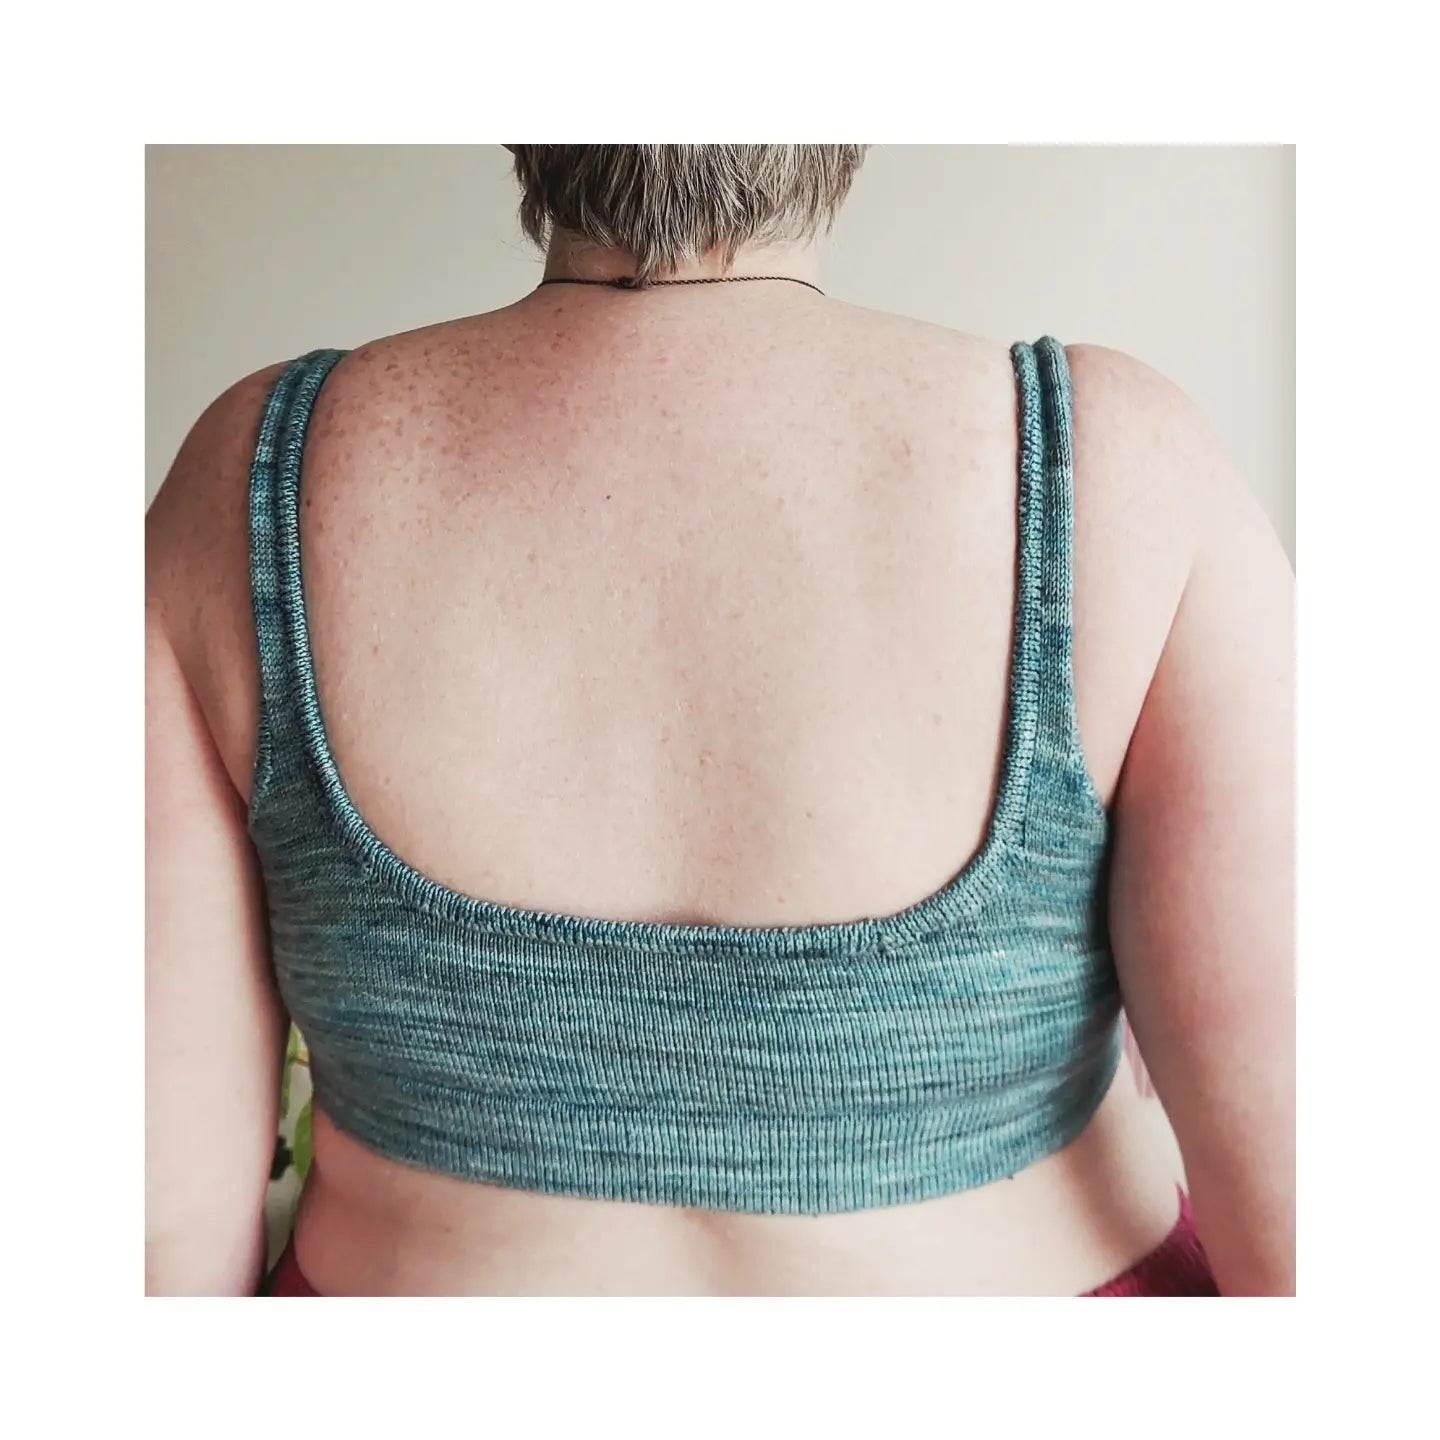 Seen from behind, Jenny wears a hand knit bralette, made with grey-green variegated yarn.